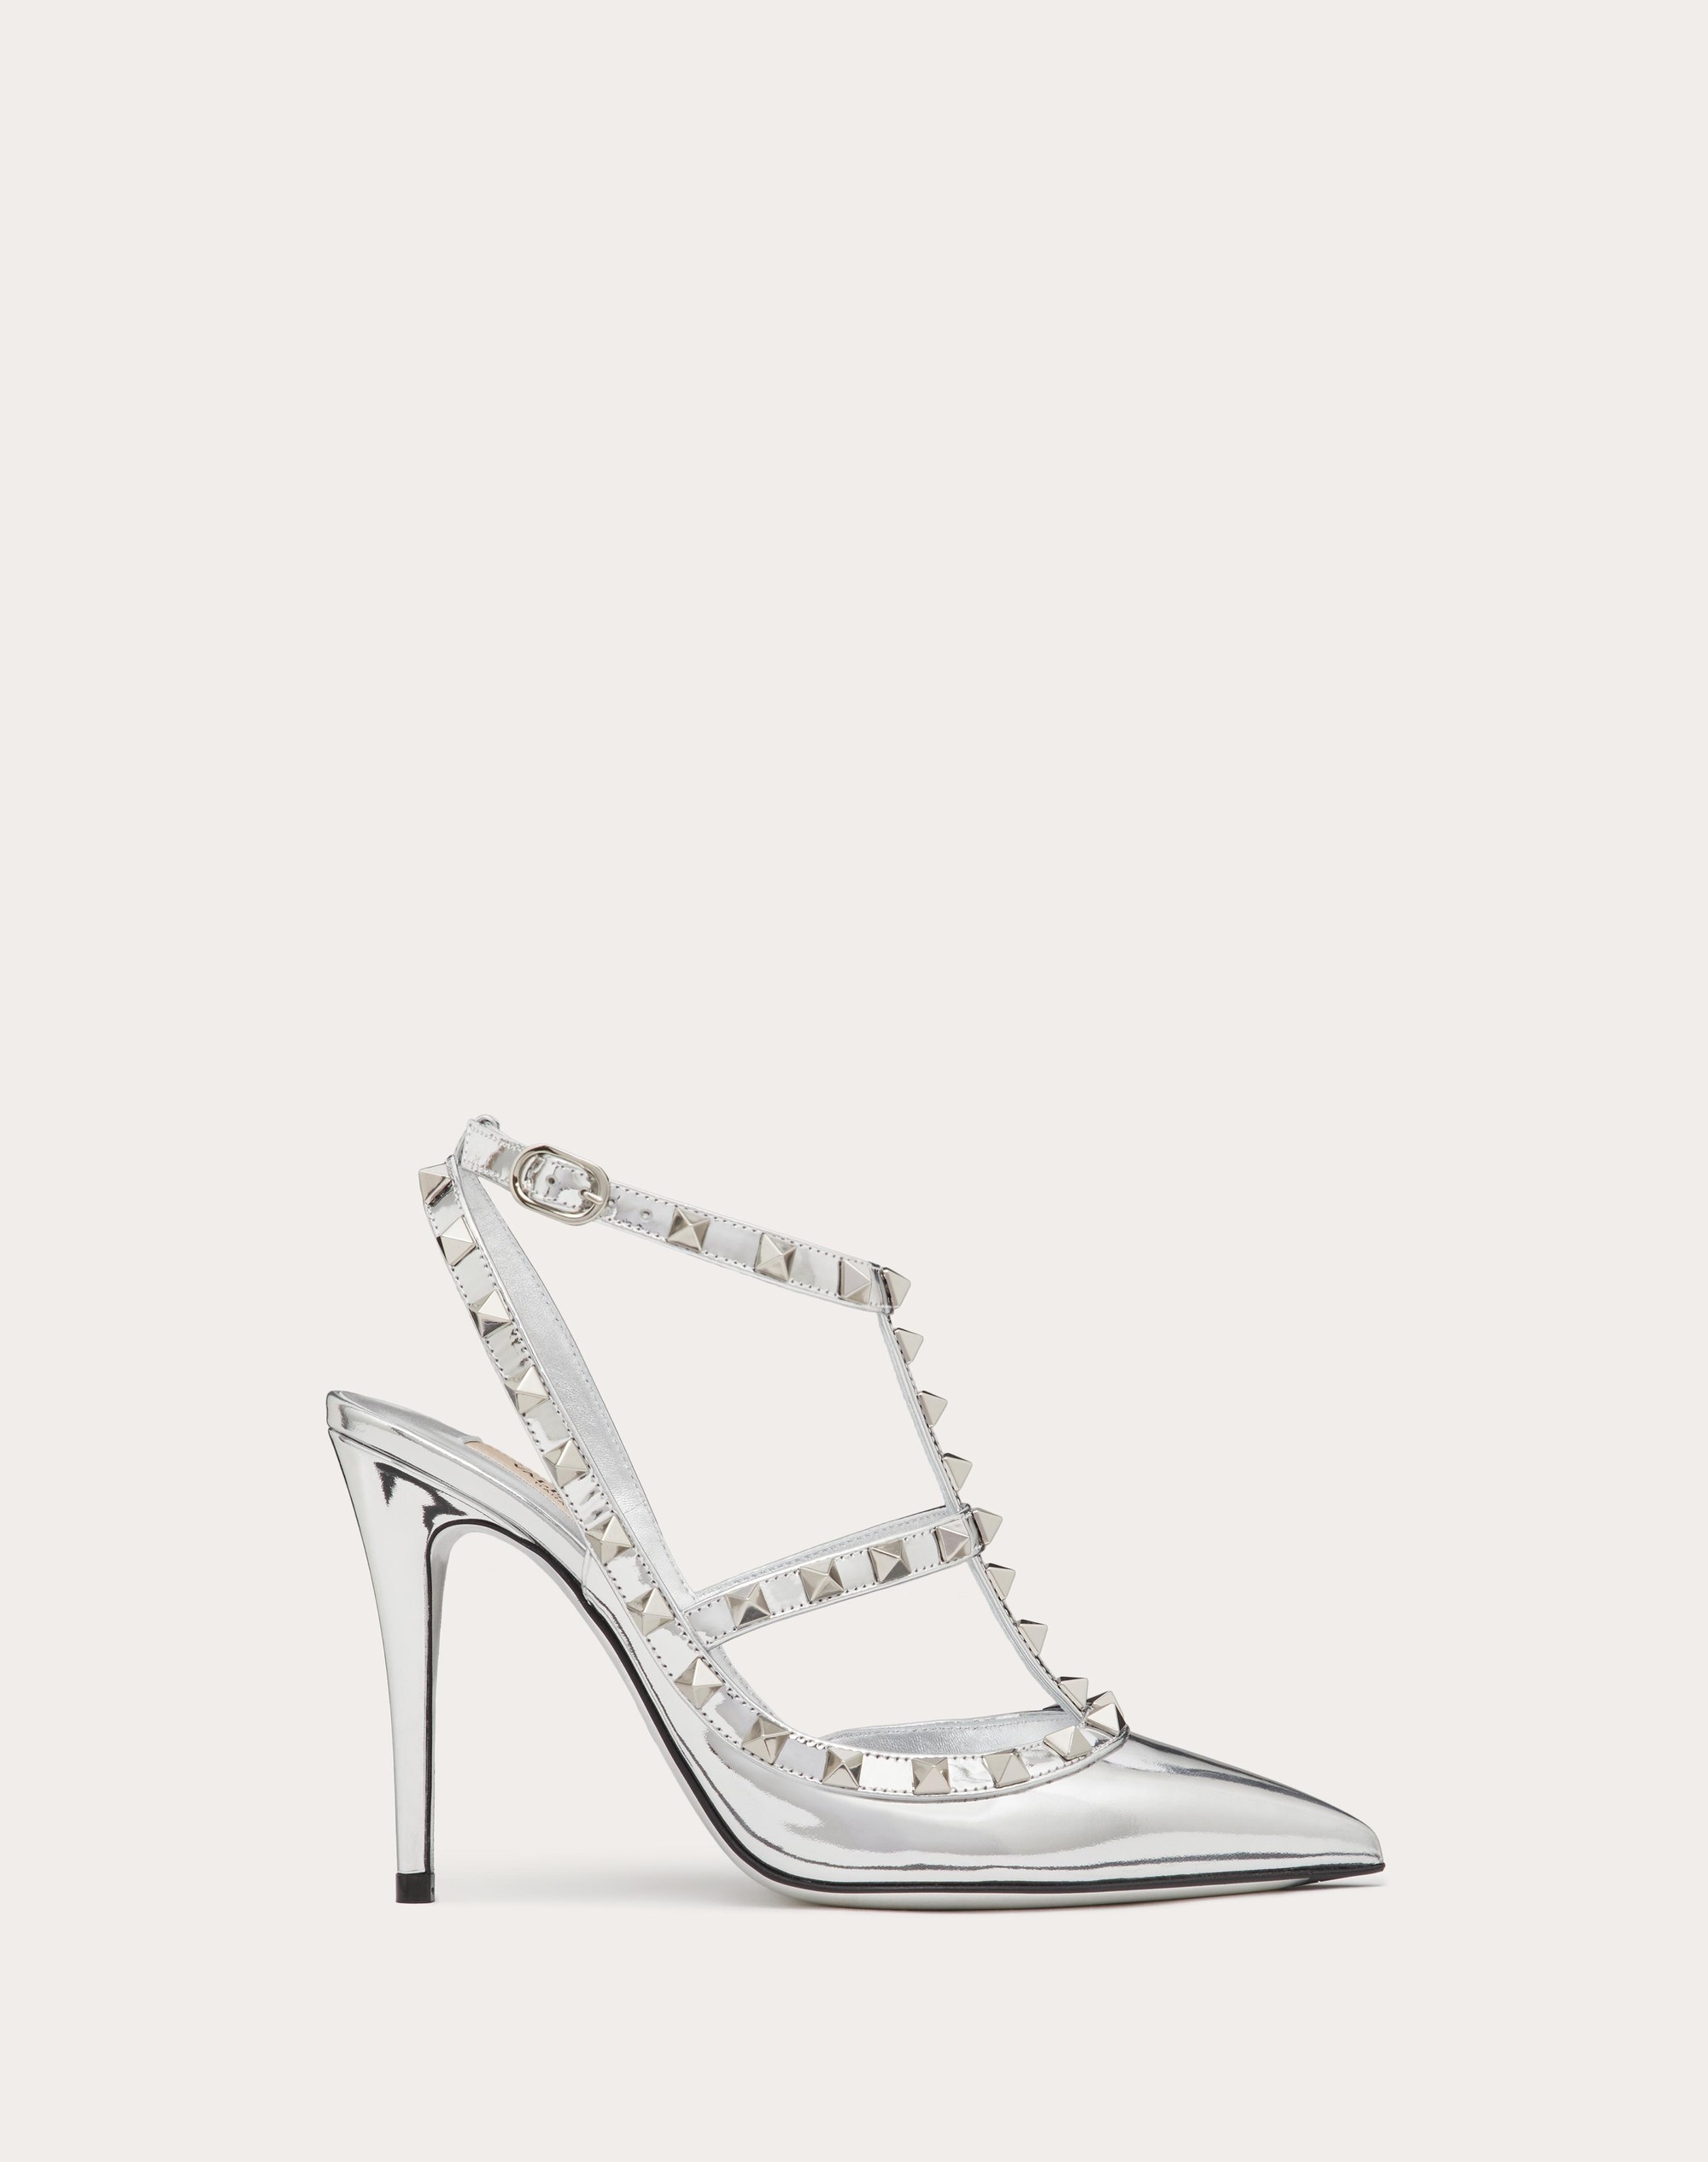 ROCKSTUD MIRROR-EFFECT PUMP WITH MATCHING STRAPS AND STUDS 100MM - 1